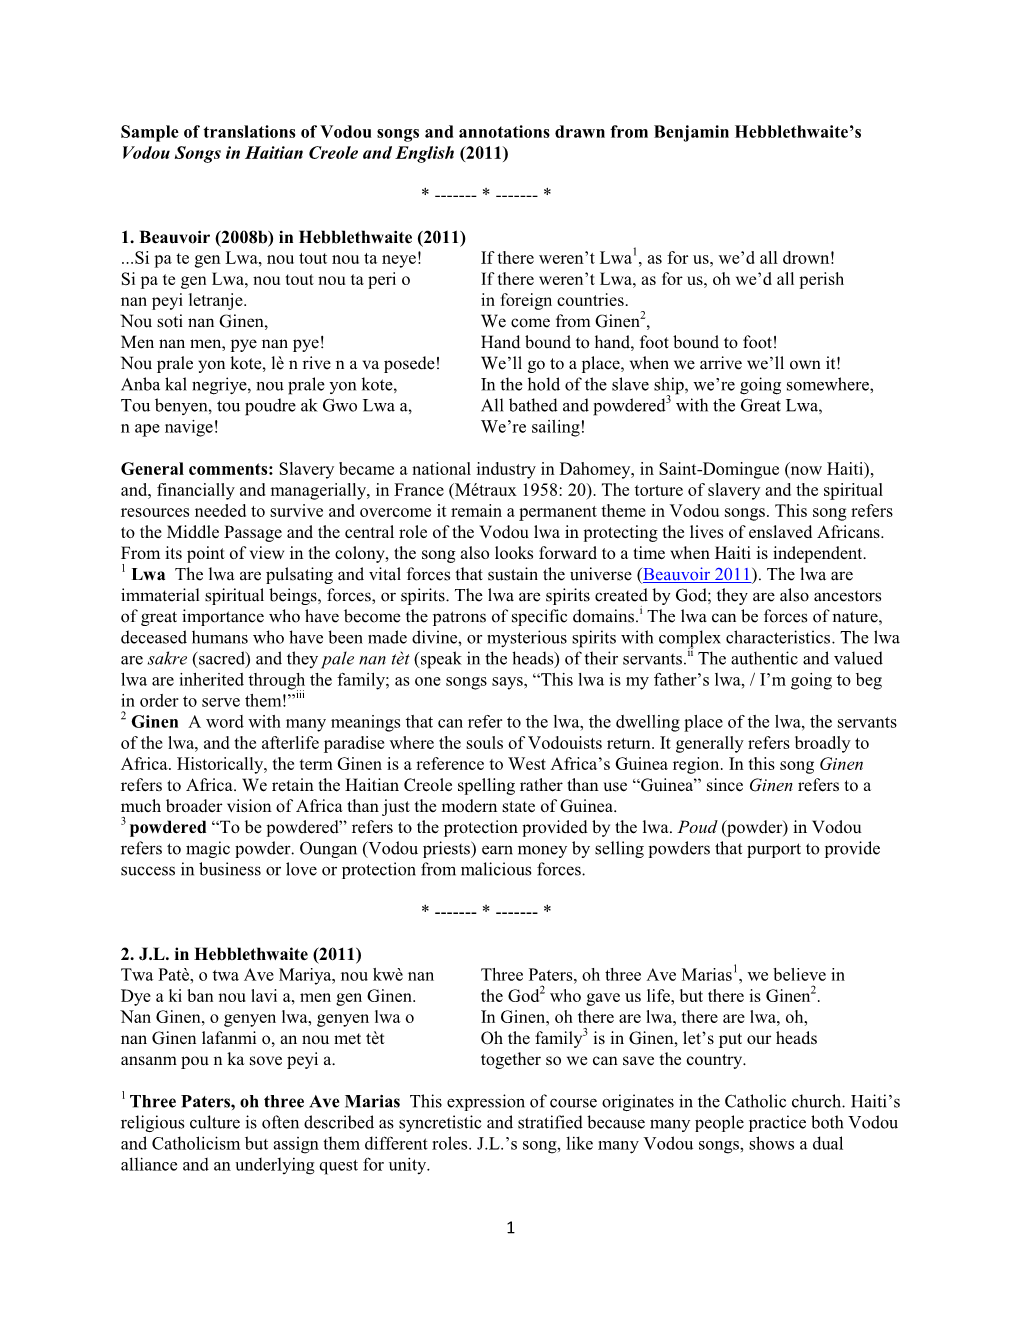 1 Sample of Translations of Vodou Songs and Annotations Drawn from Benjamin Hebblethwaite's Vodou Songs in Haitian Creole